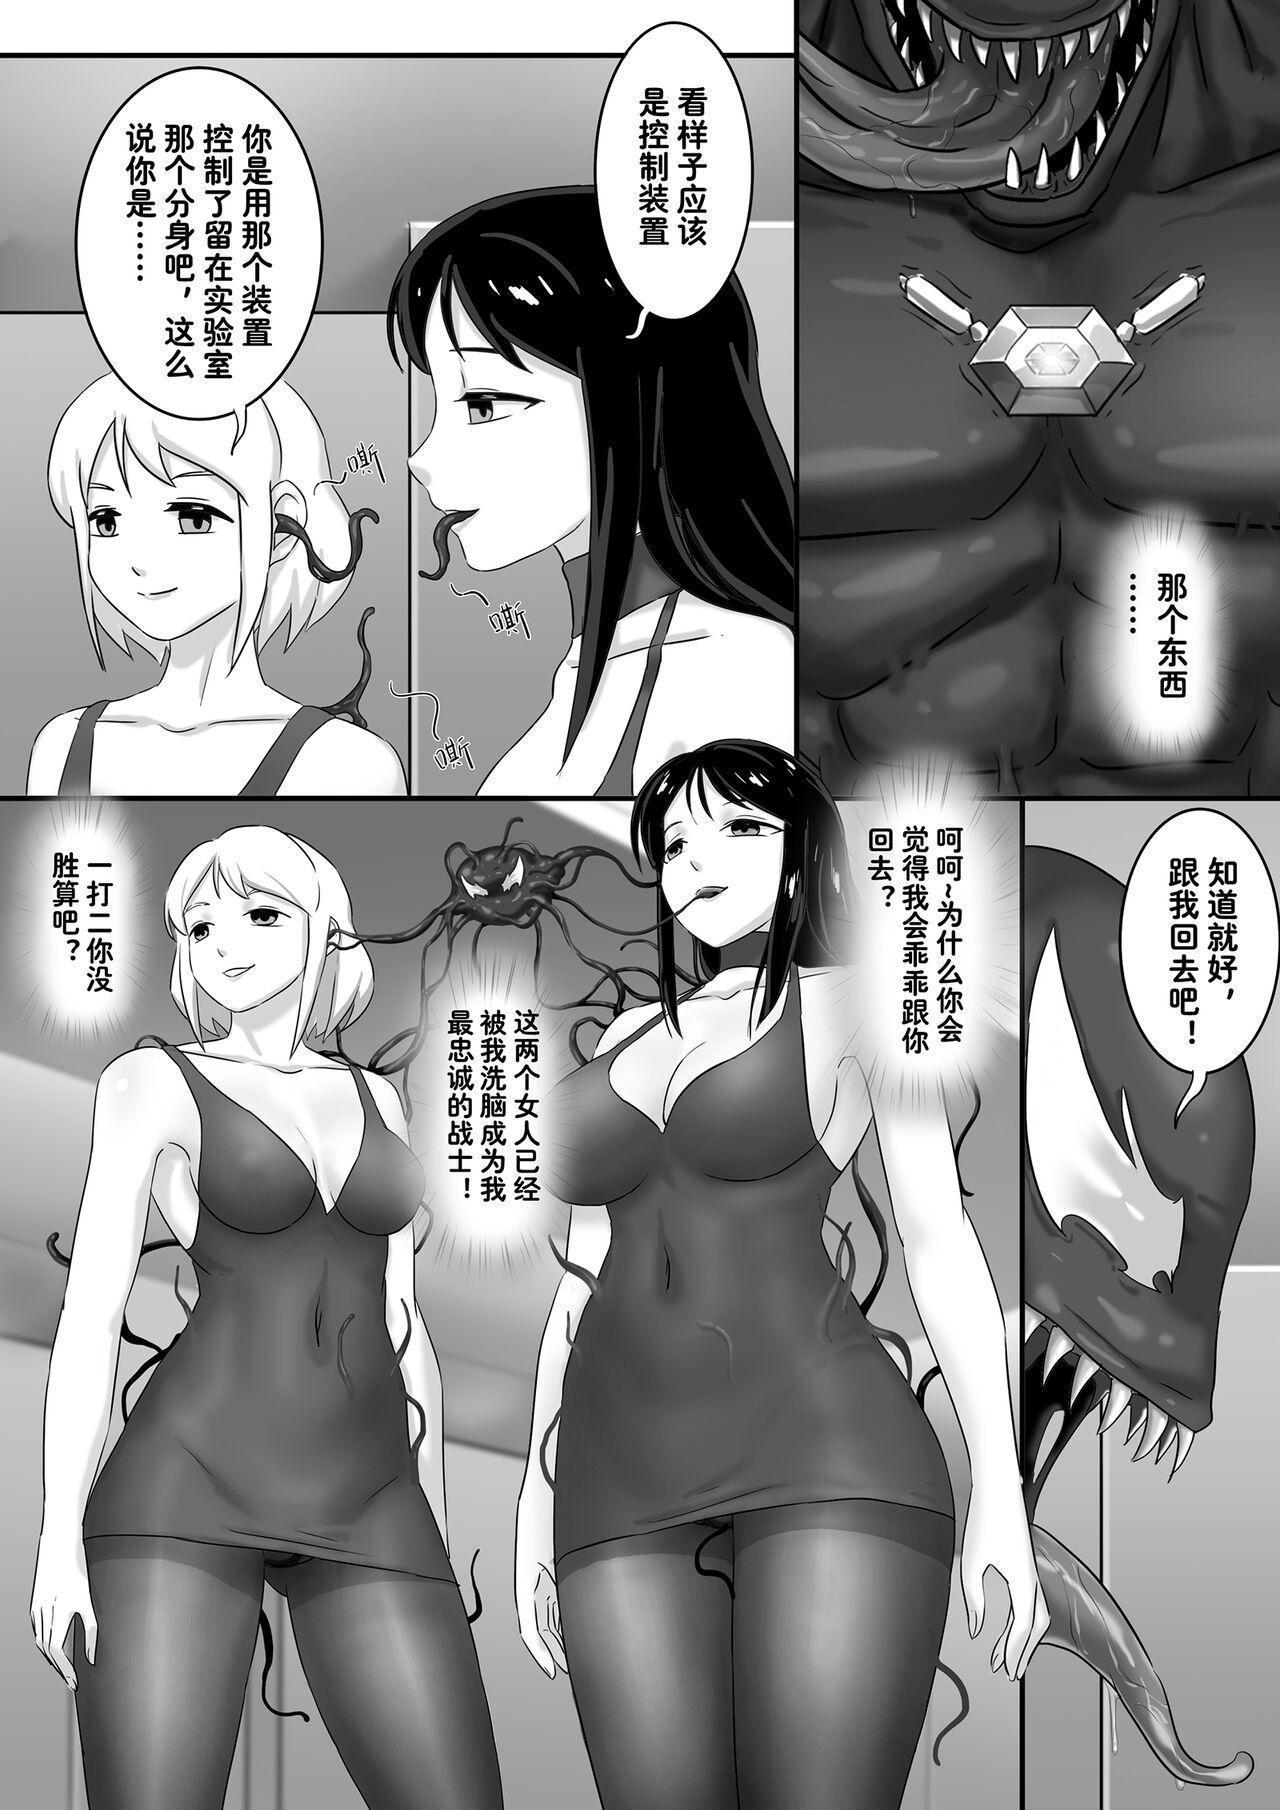 Show 毒液——融合共生05 - Spider man Toying - Page 2